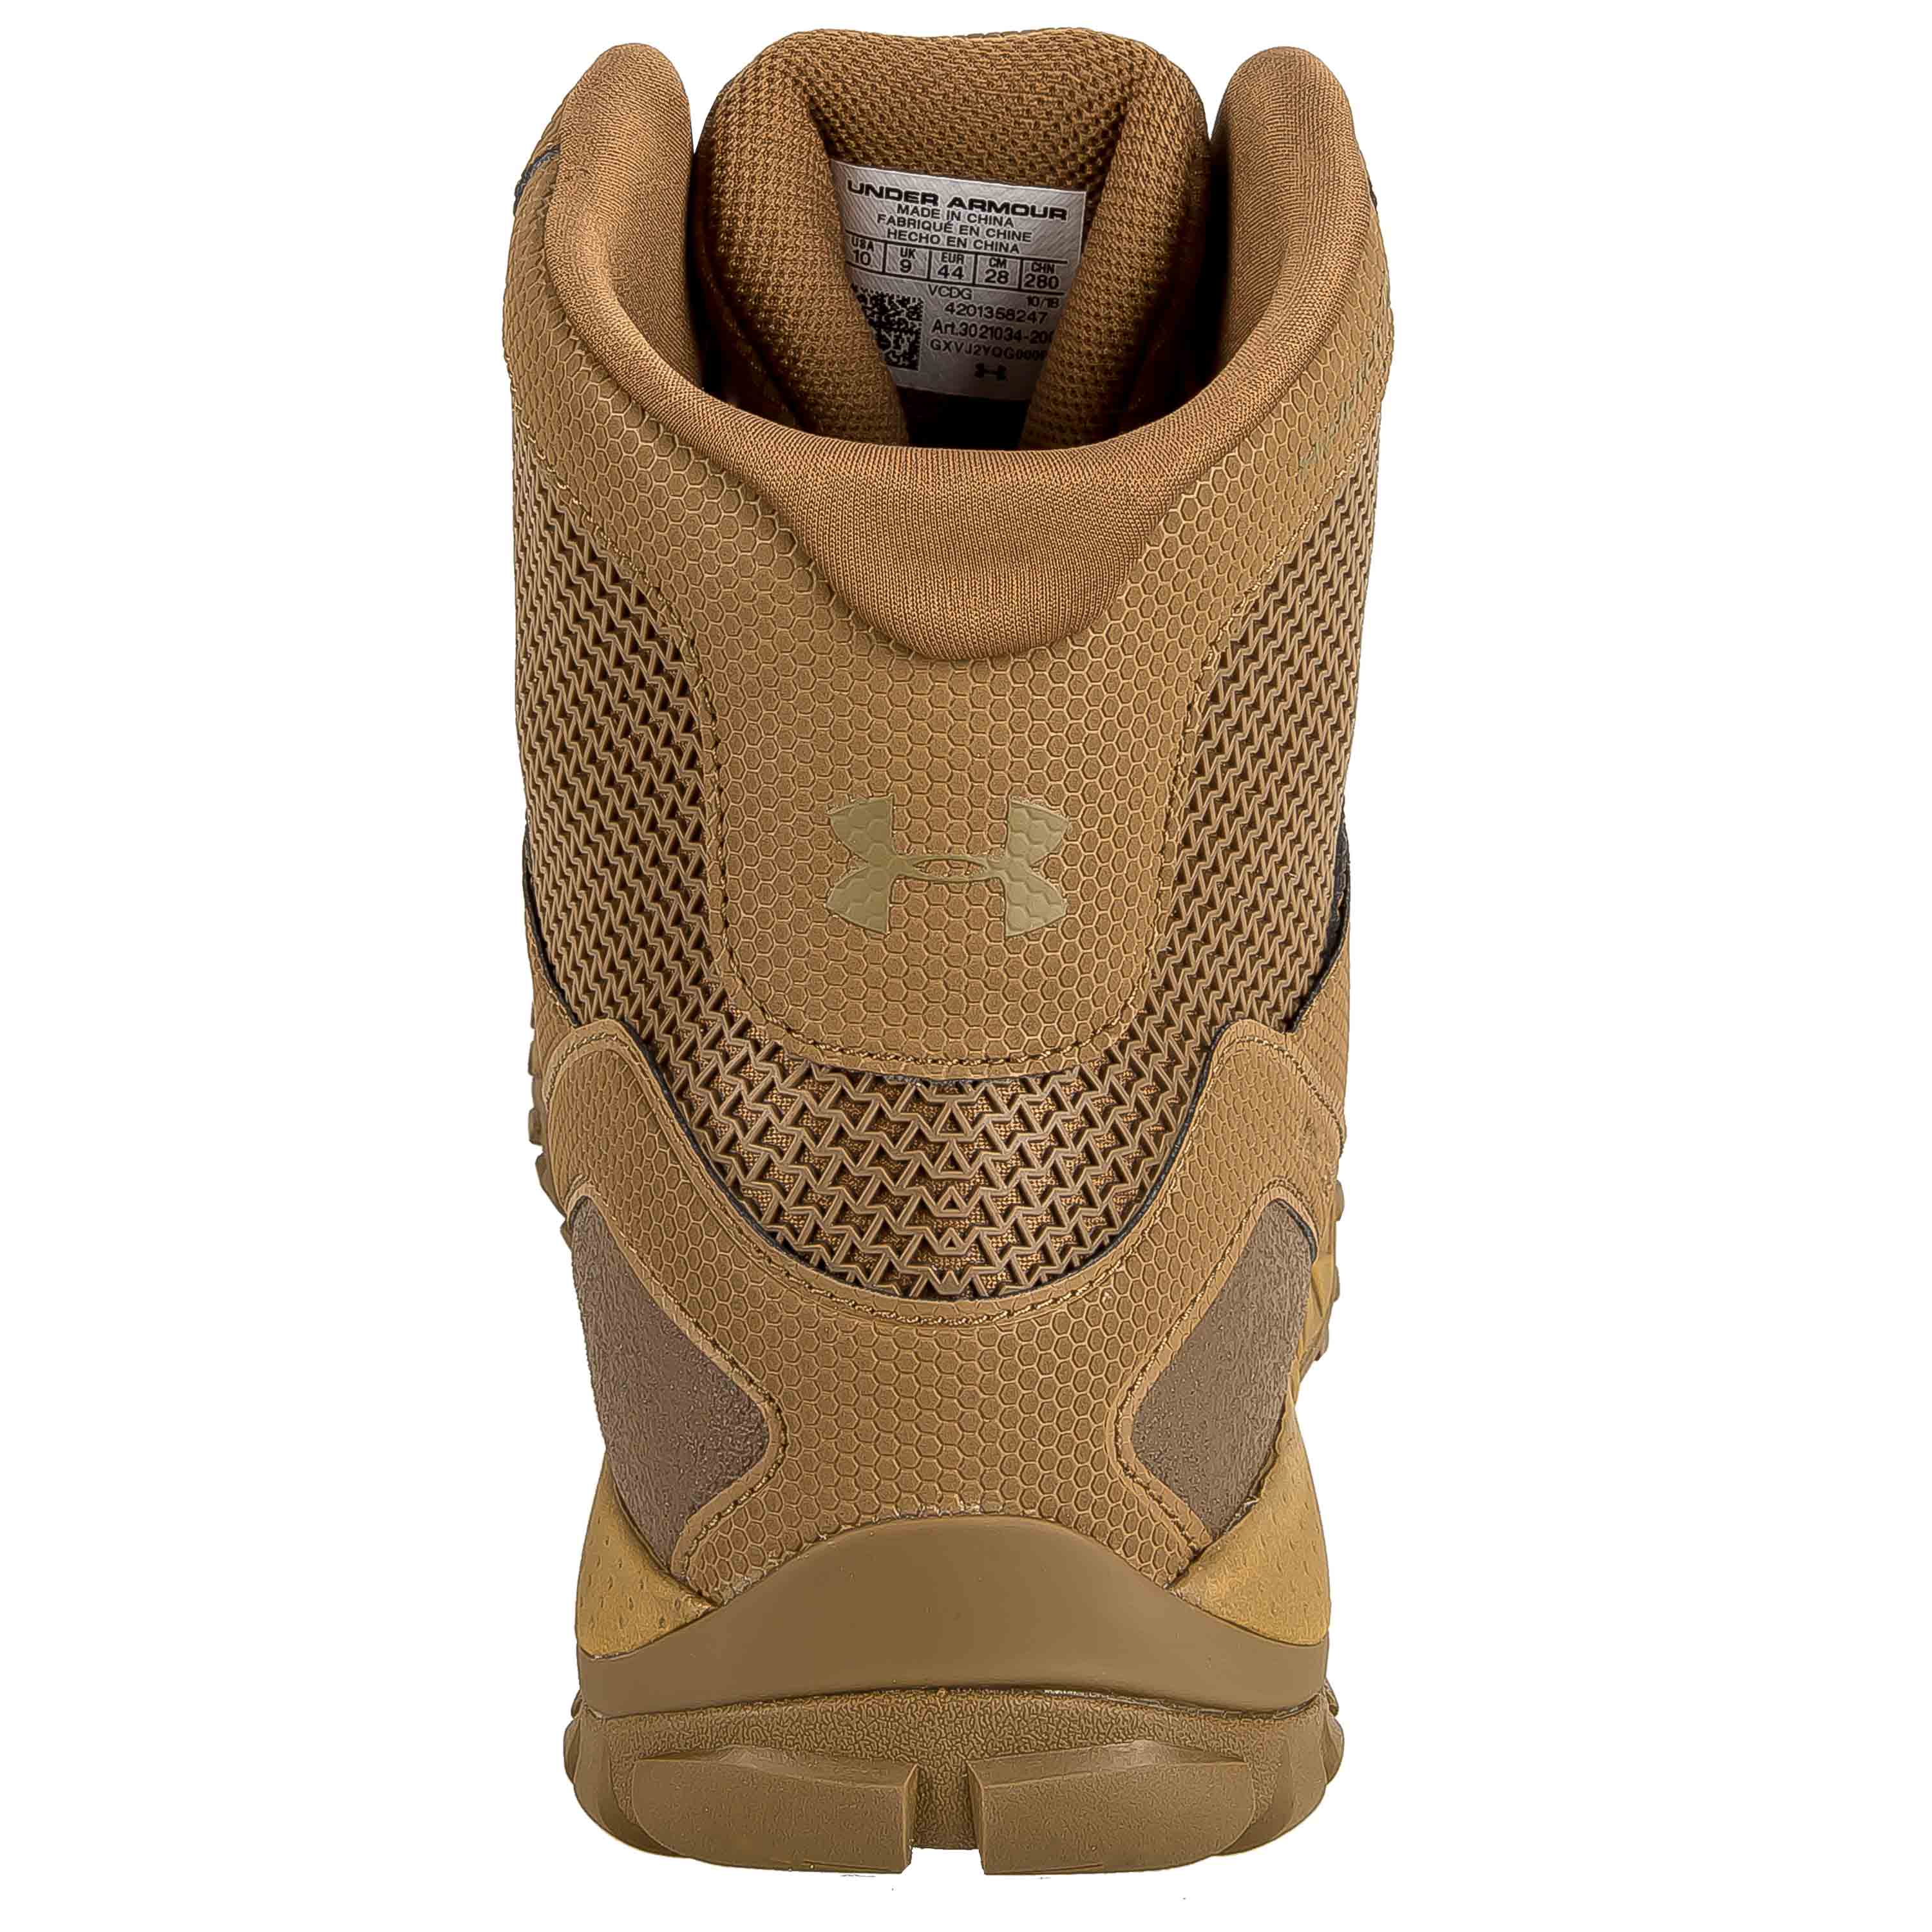 Purchase the Under Armour Tactical Boots Valsetz RTS 1.5 coyote